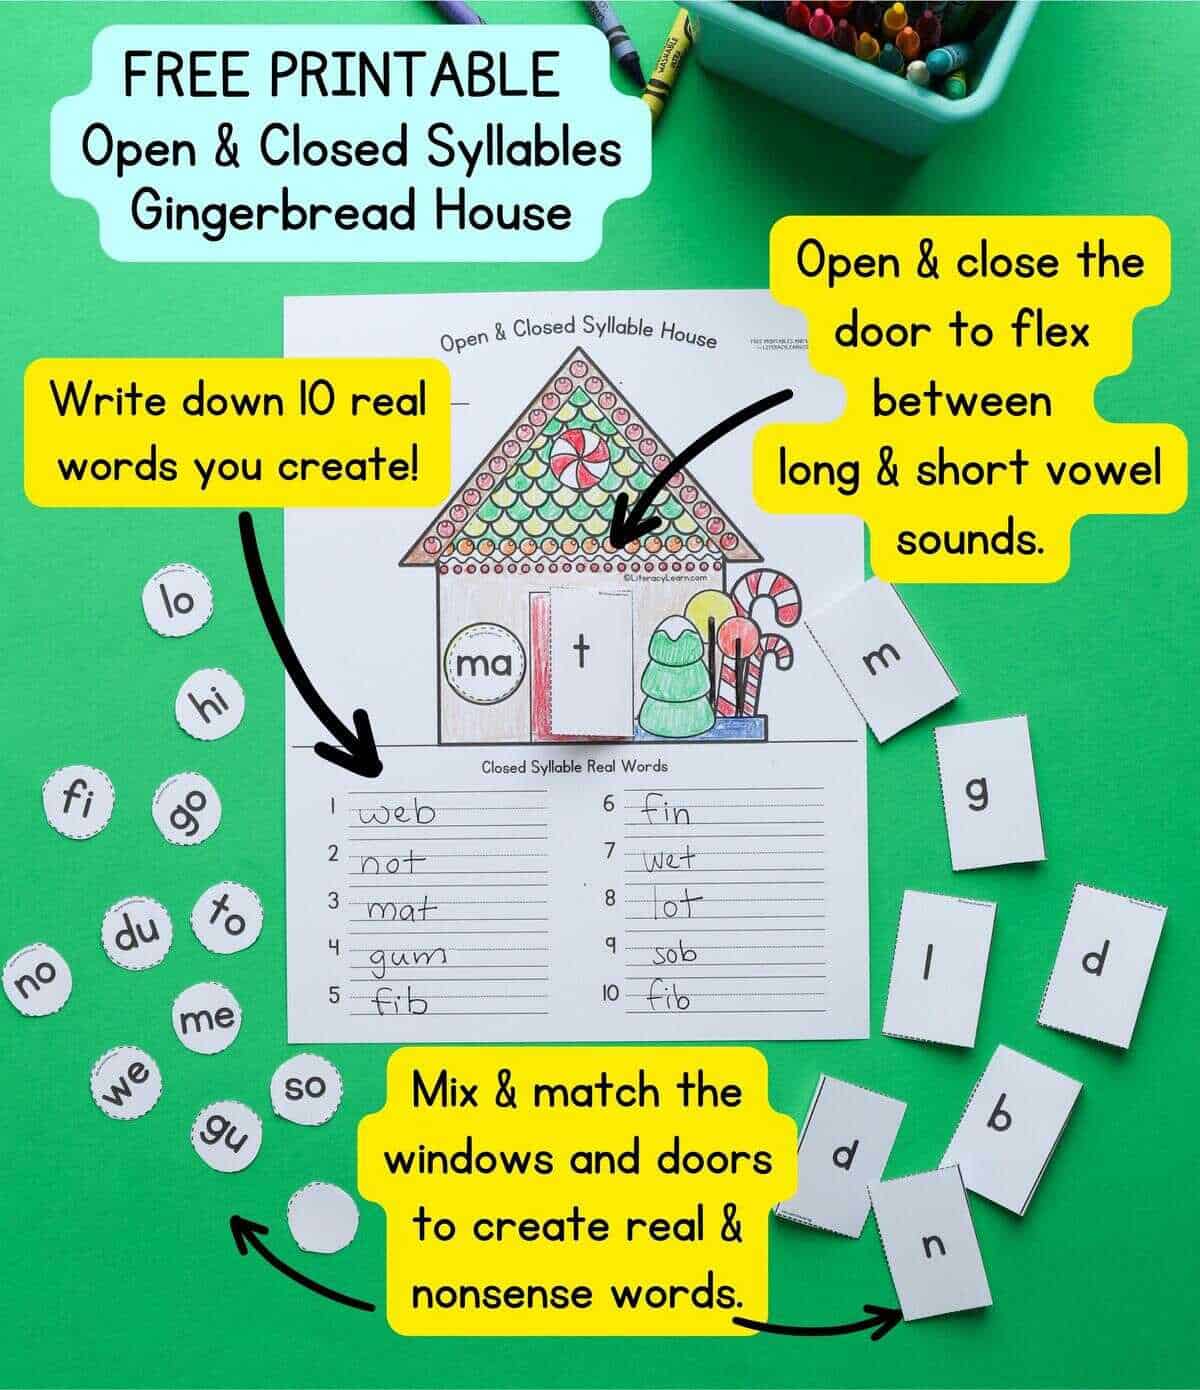 Graphic with image of the printed open & closed syllable house with instructions and explanation.